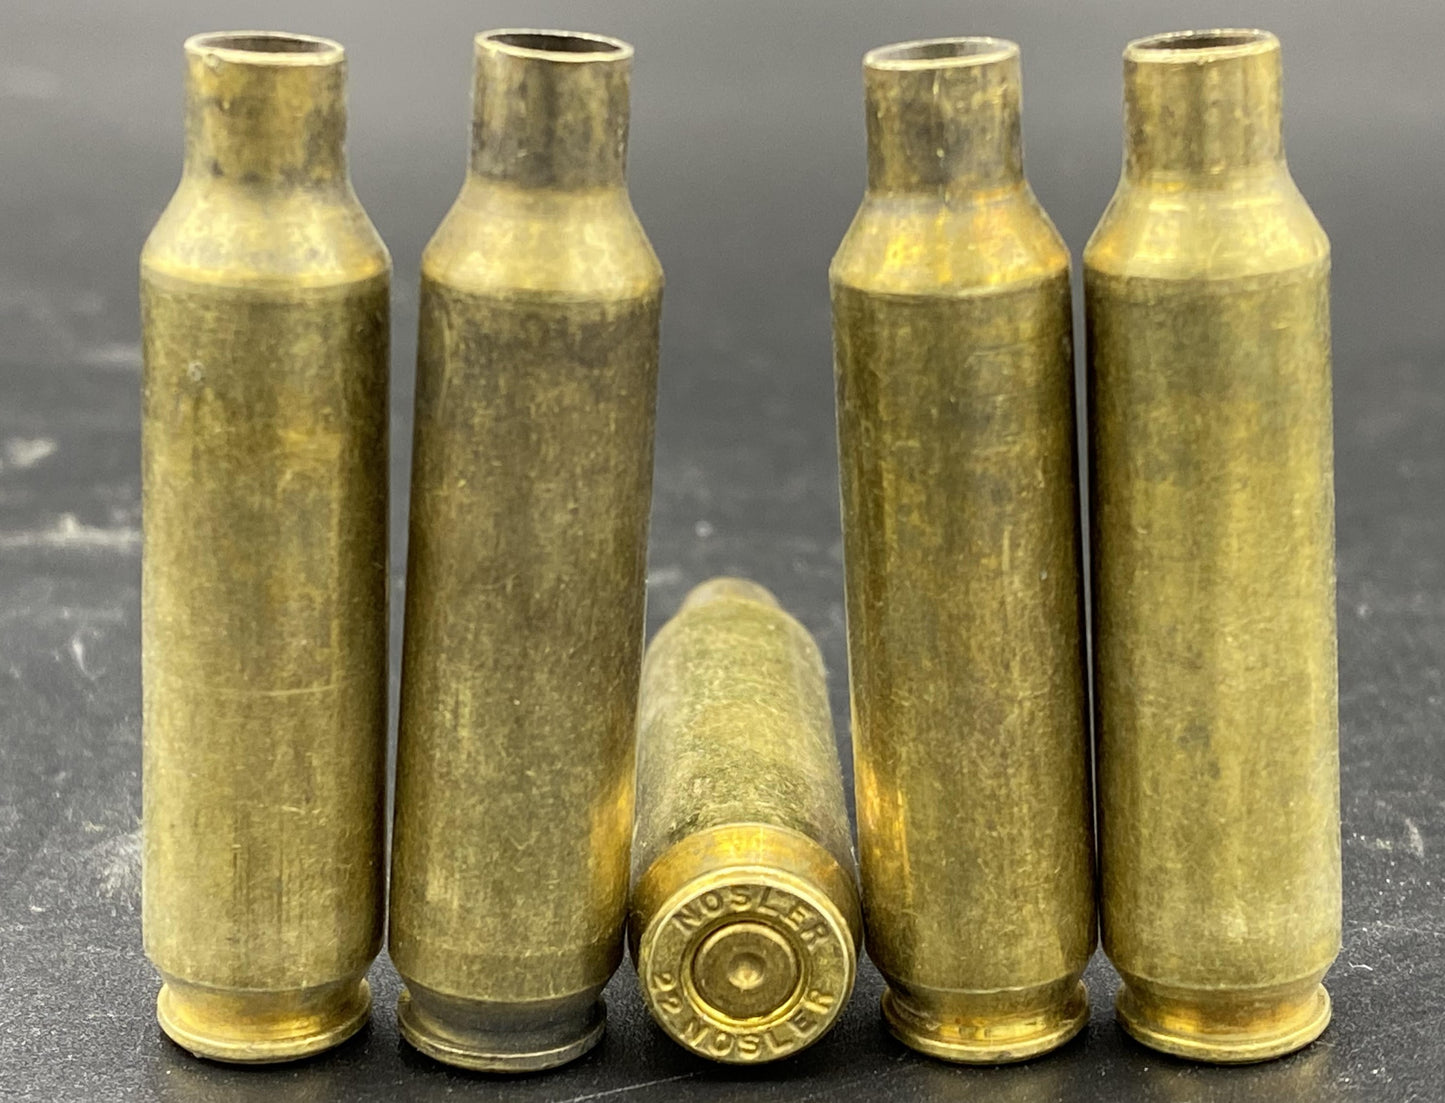 22 Nosler once fired rifle brass. Hand sorted from reputable indoor/military ranges for reloading. Reliable spent casings for precision shooting.